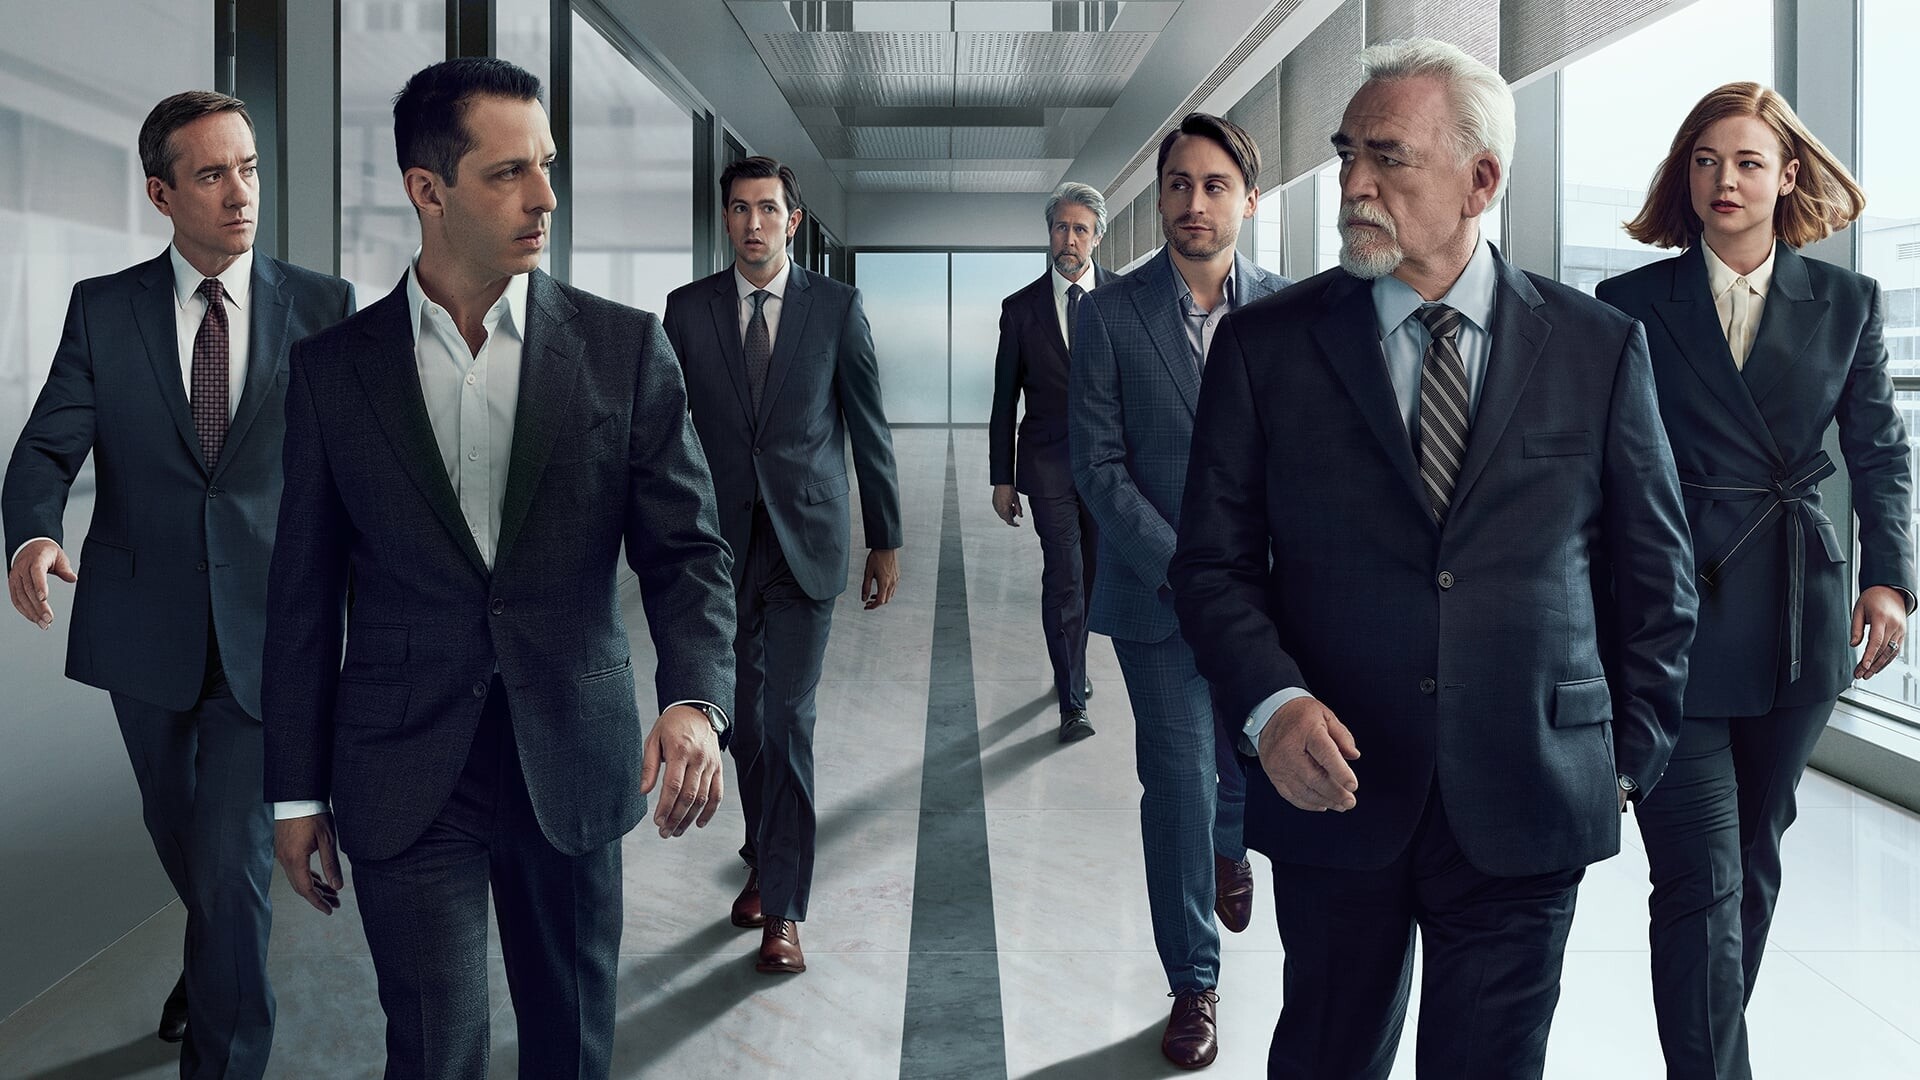 Succession (TV Series): An American satirical comedy-drama television series, created by Jesse Armstrong. 1920x1080 Full HD Wallpaper.